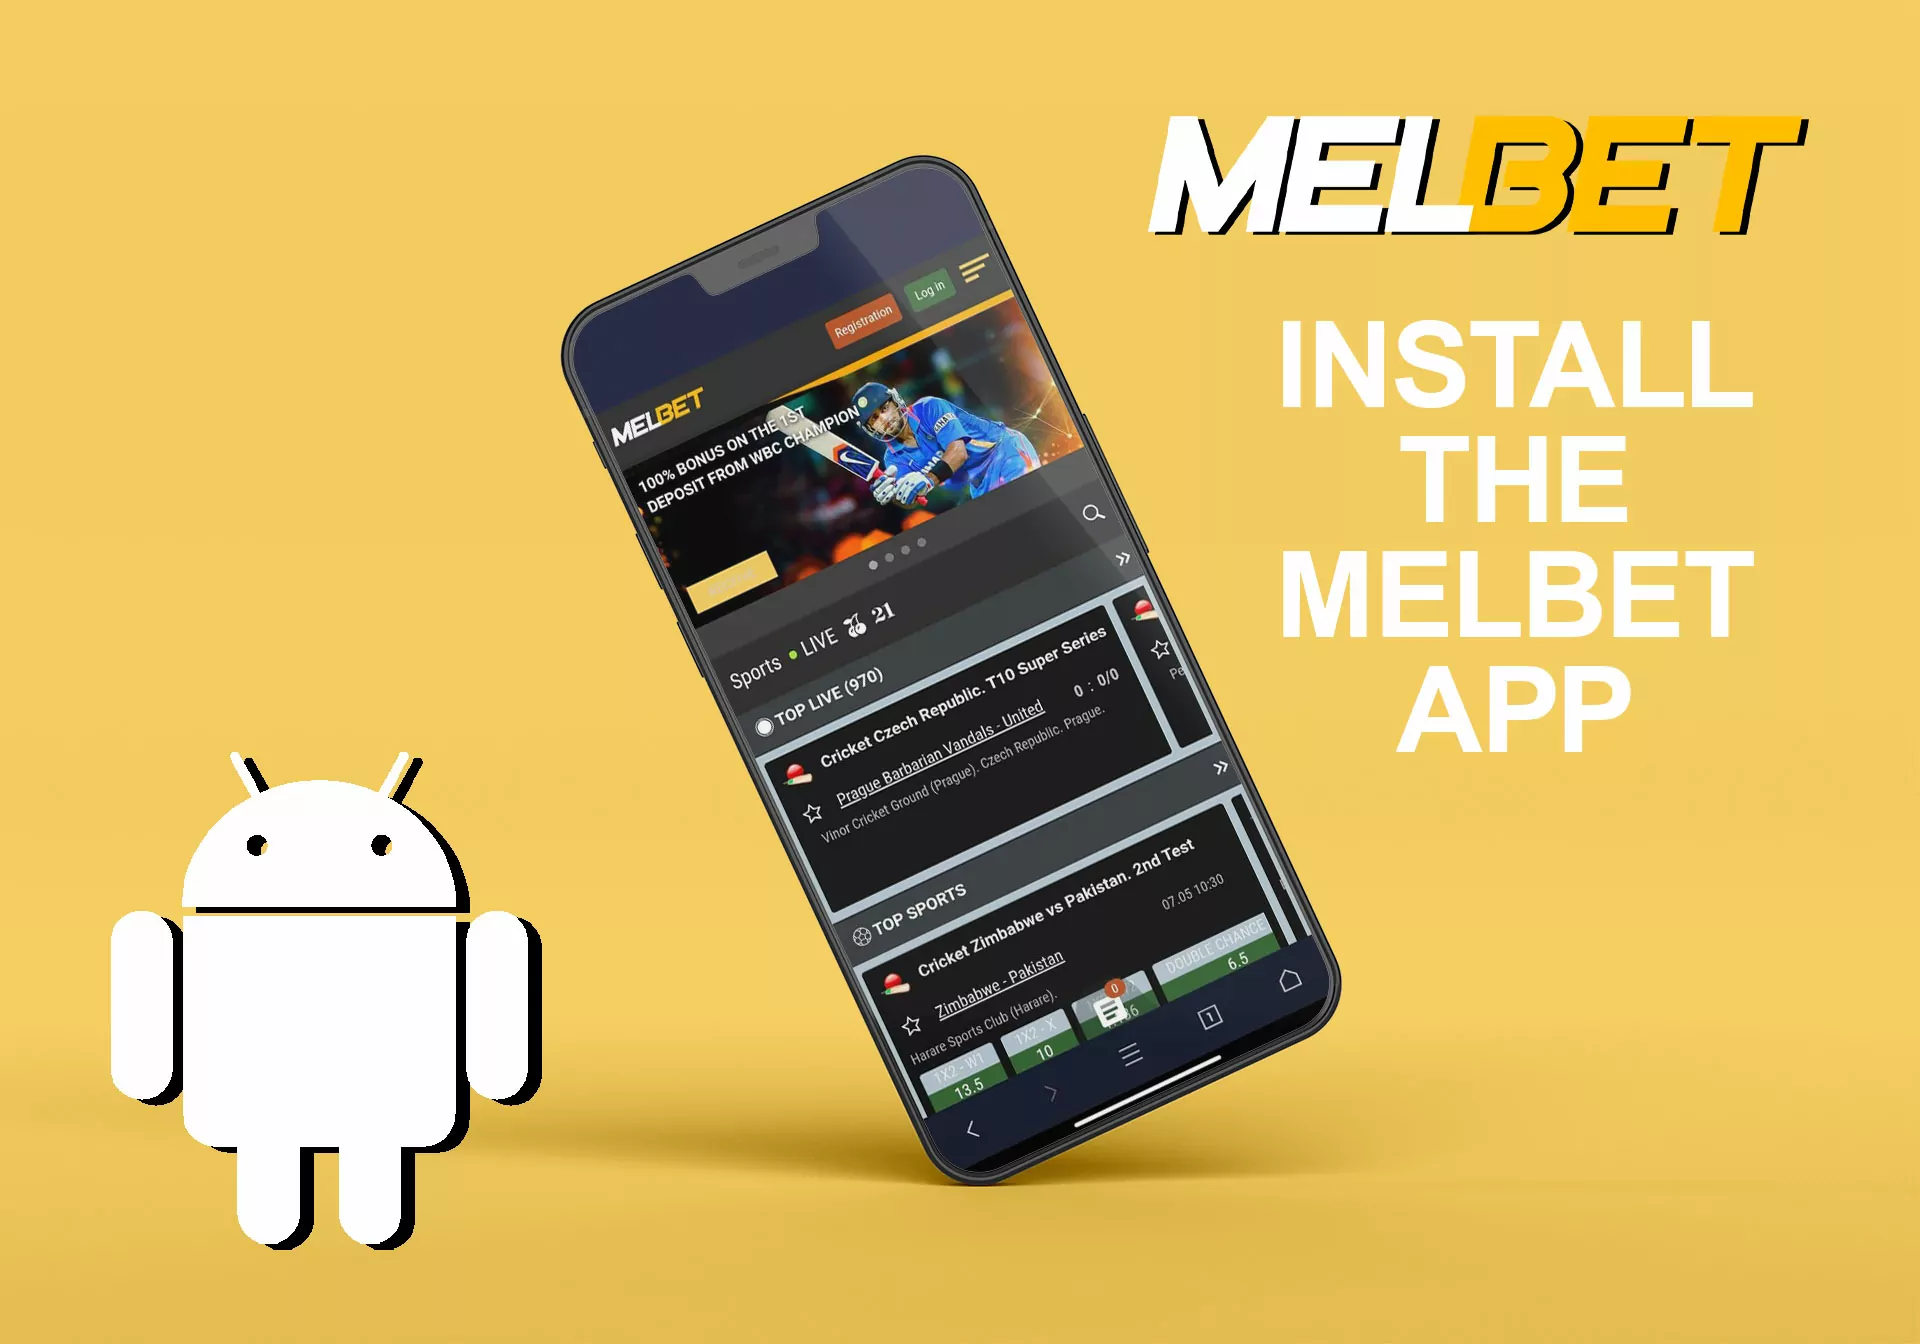 You can install the Mellbet mobile app on Android right now.